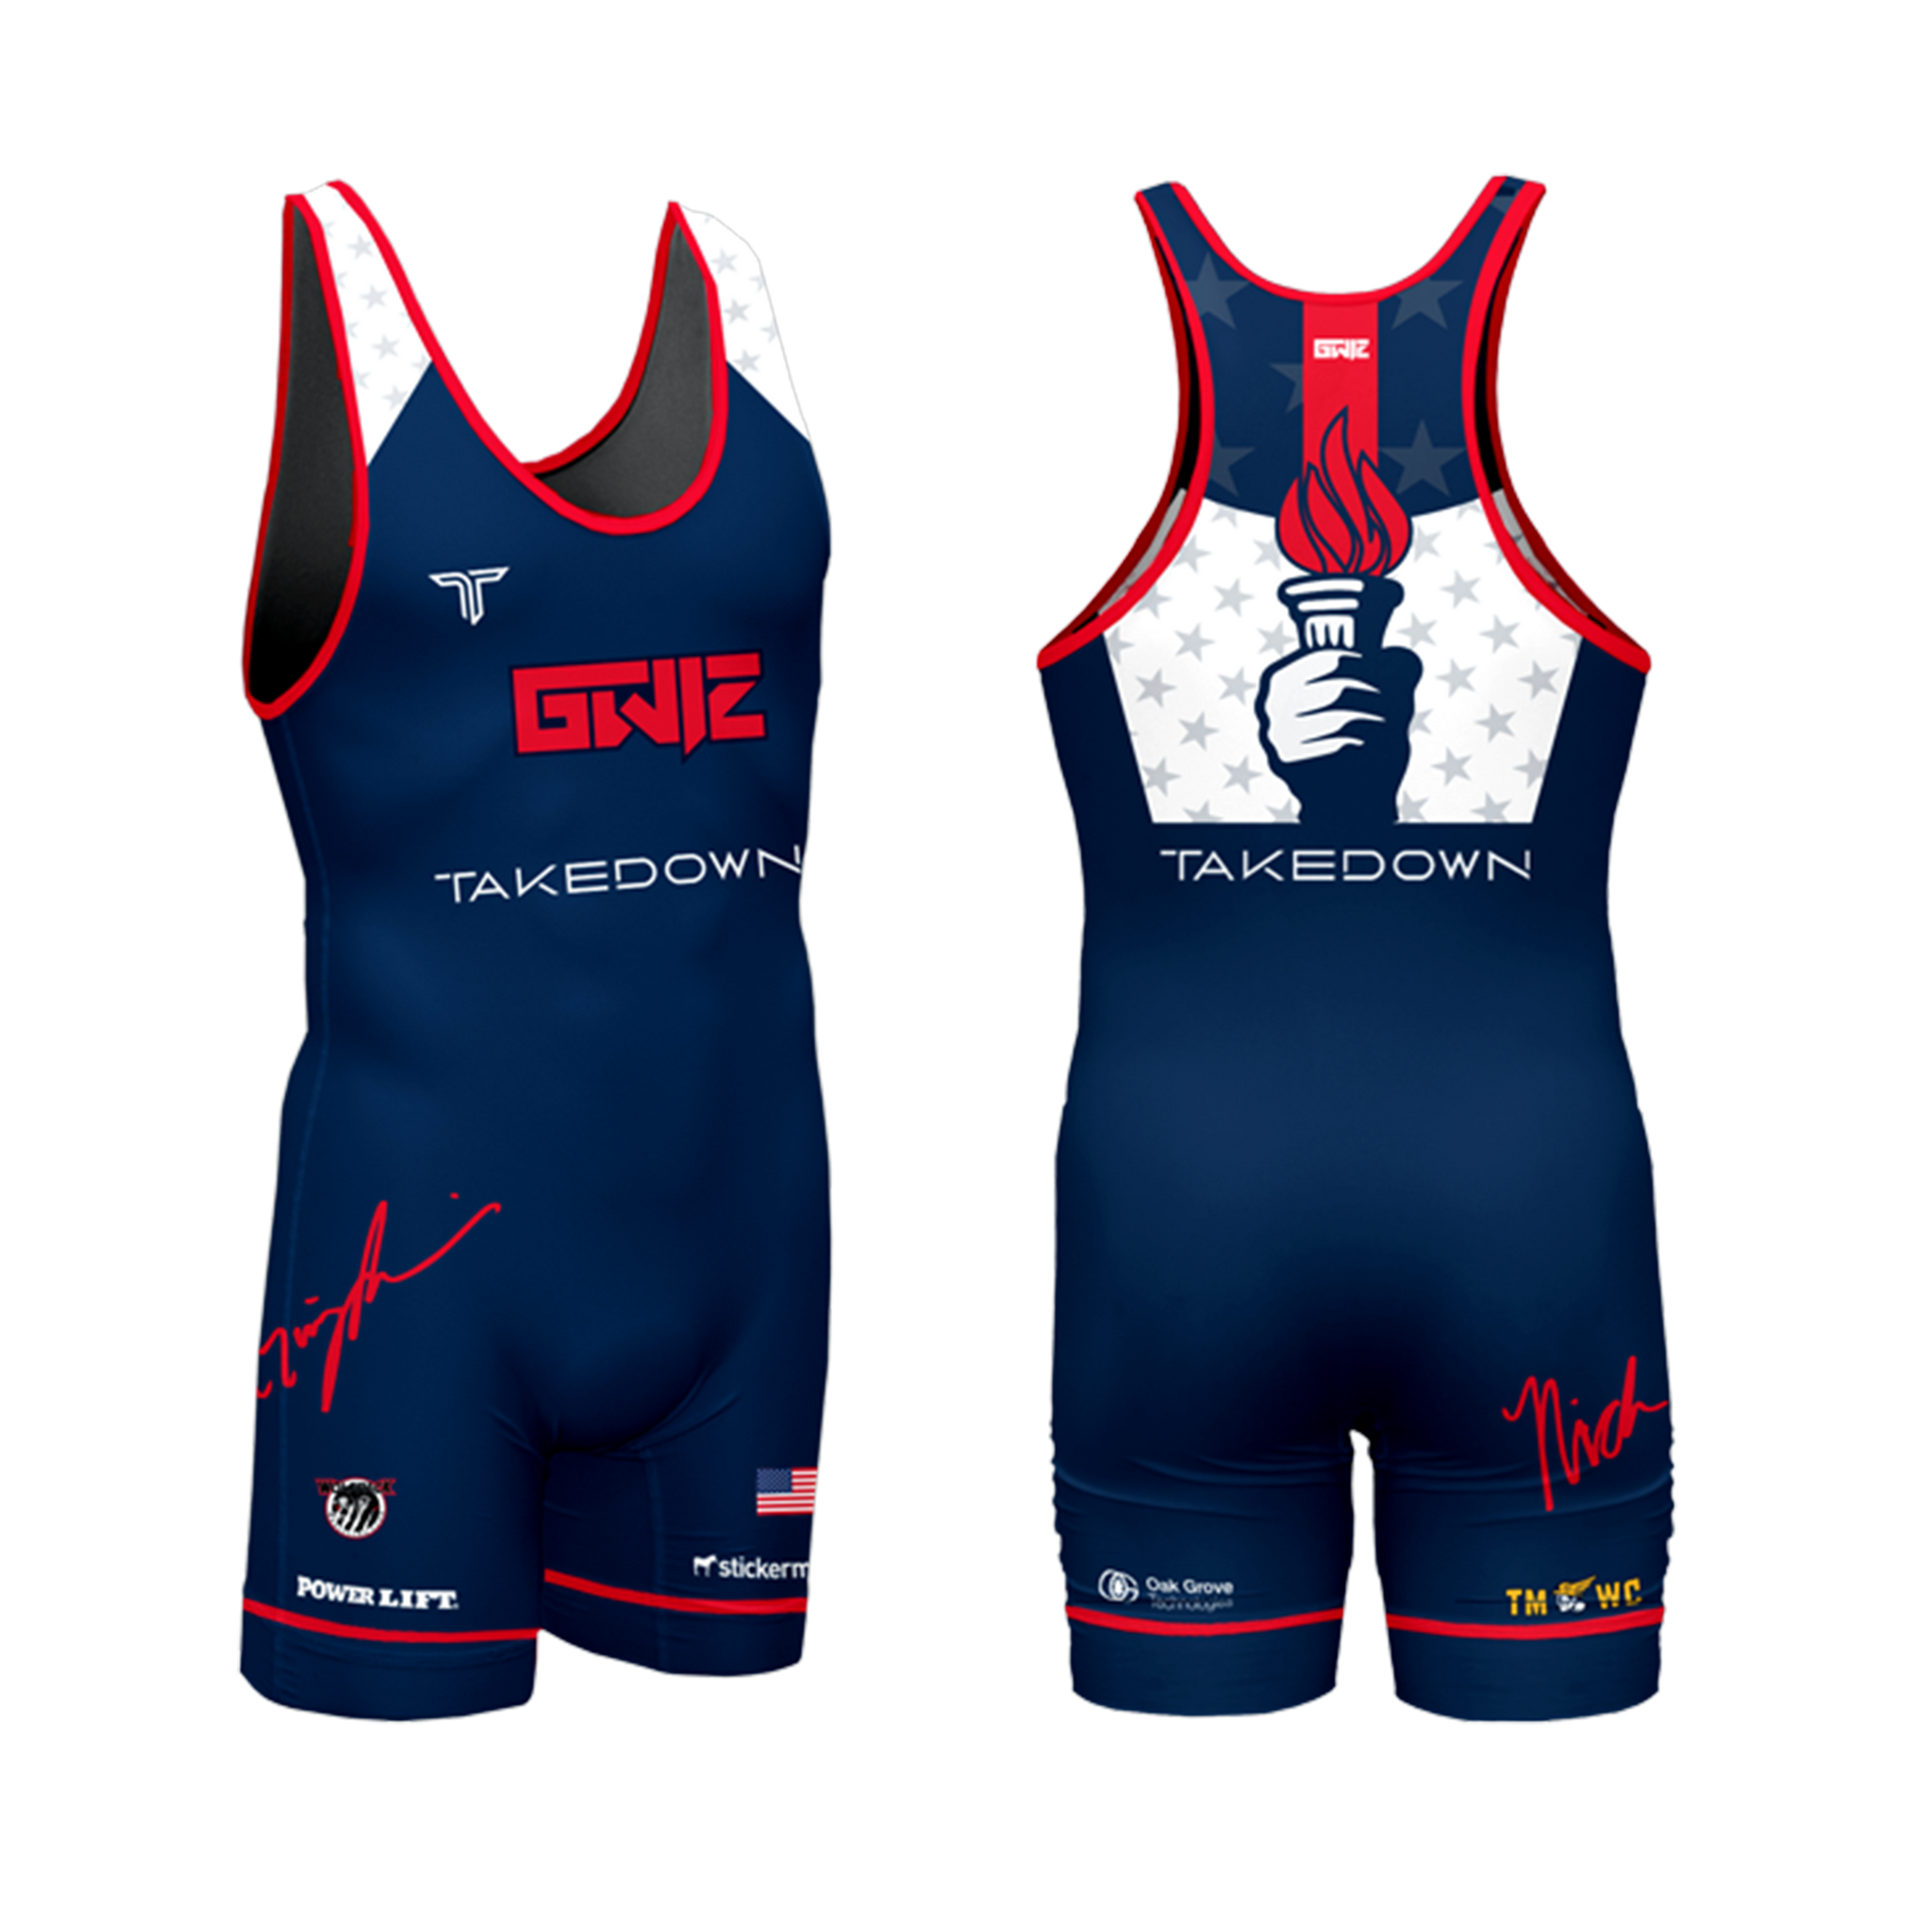 Gwiz Navy Competition Singlet